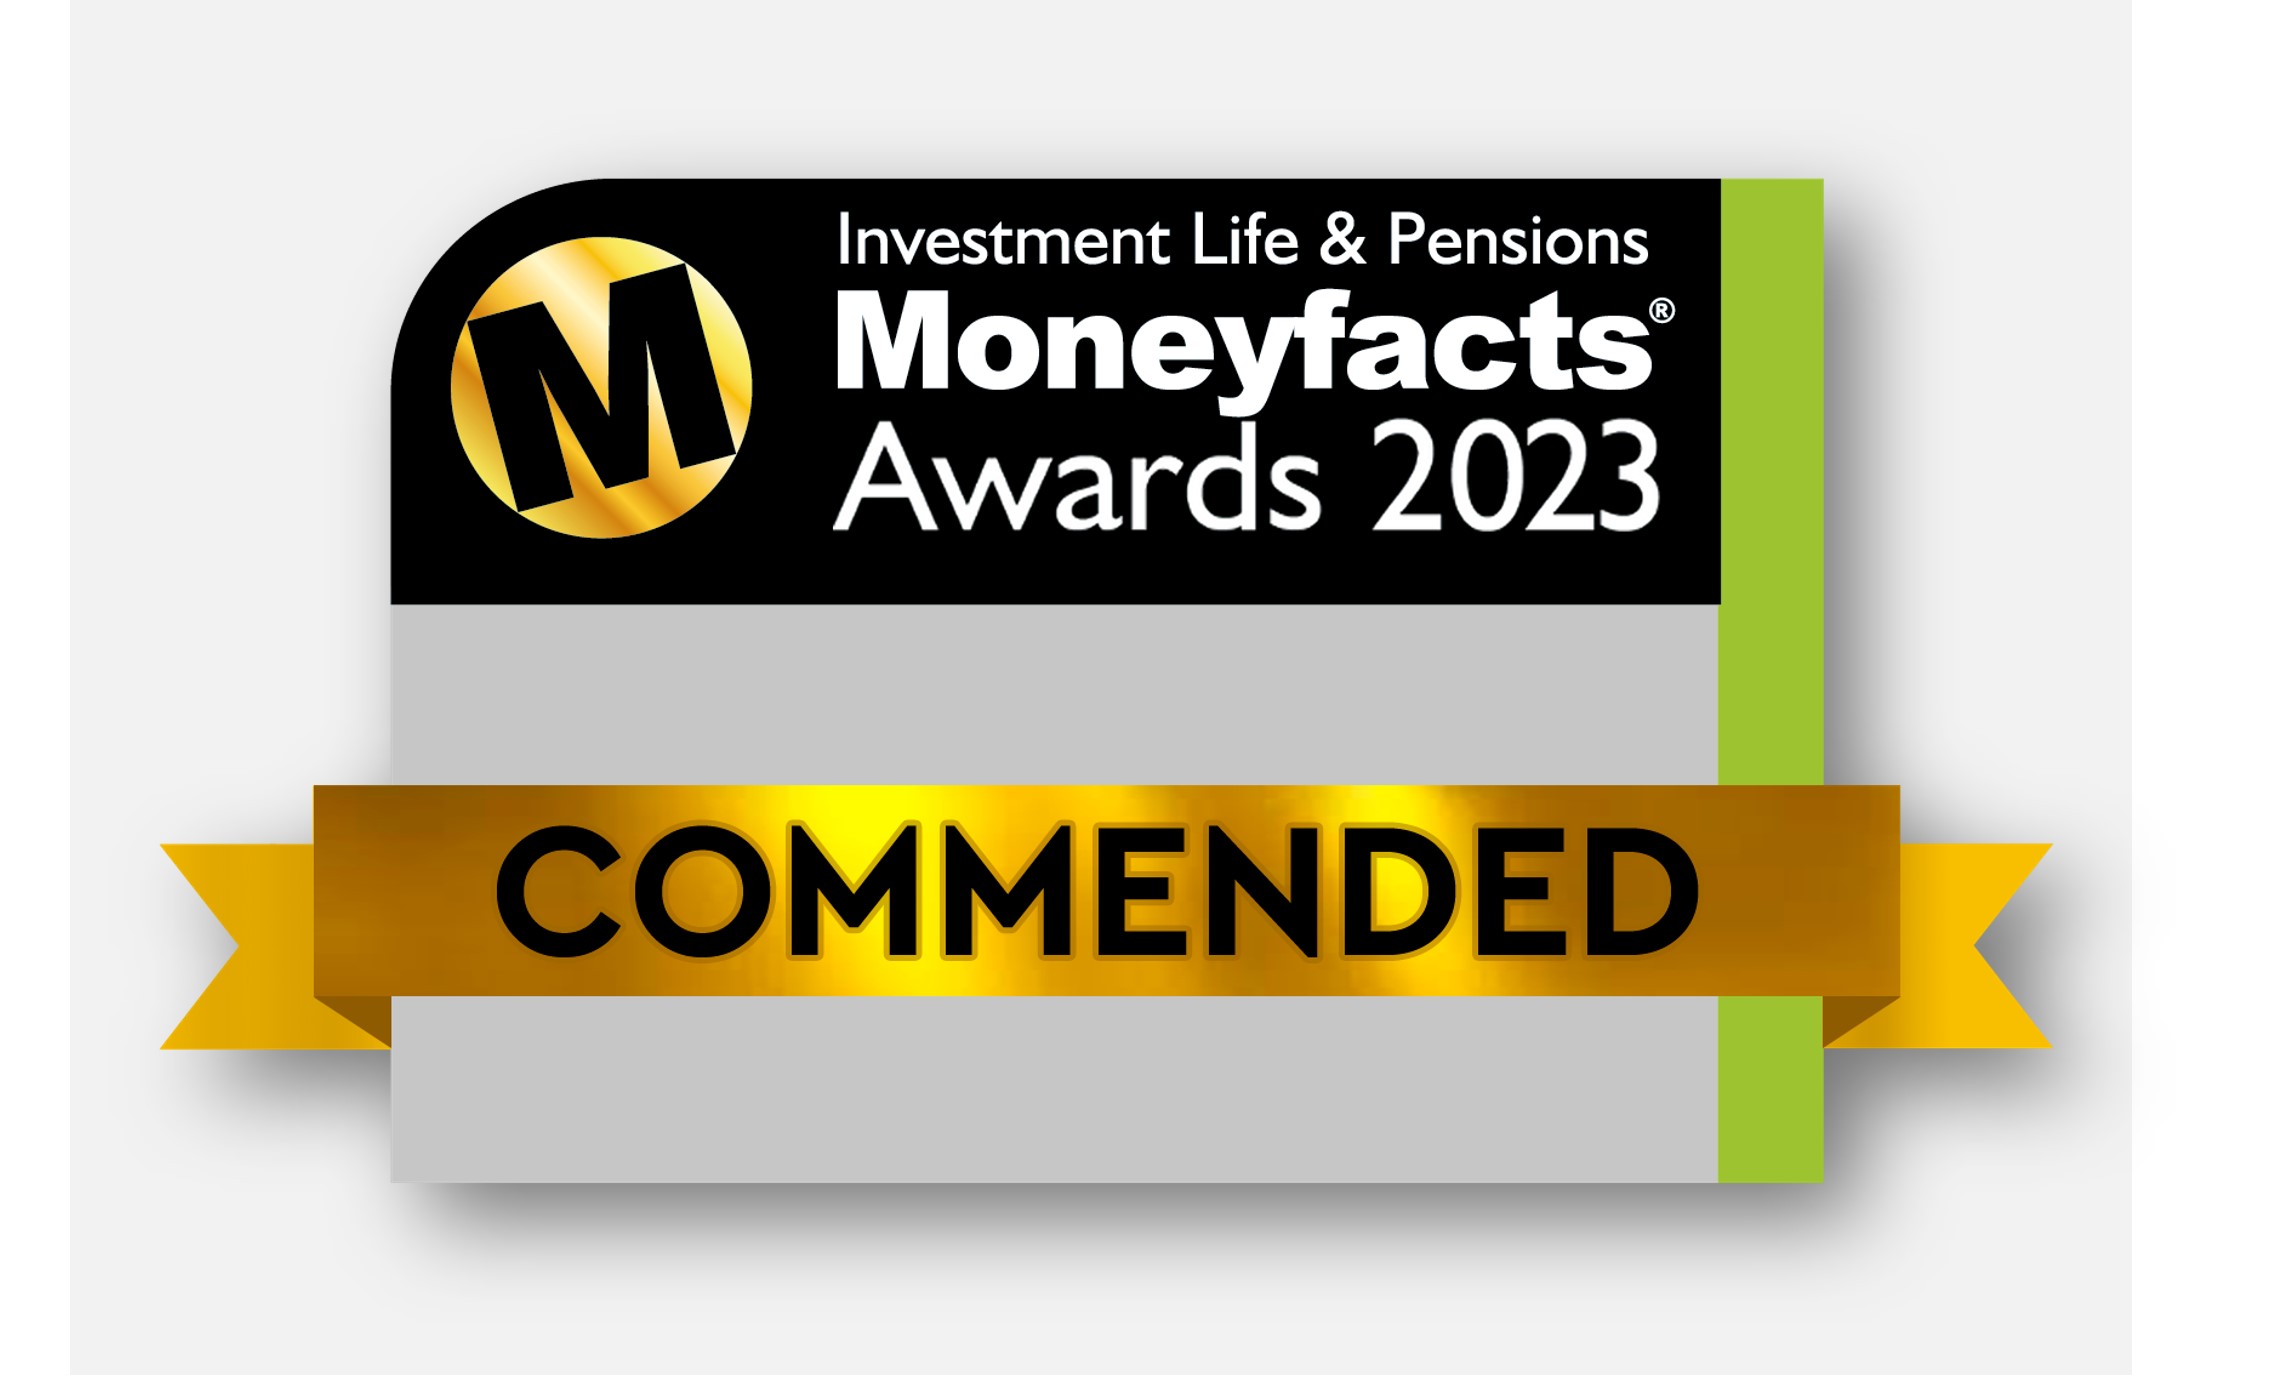 TAM have been Commended for Best Ethical DFM!